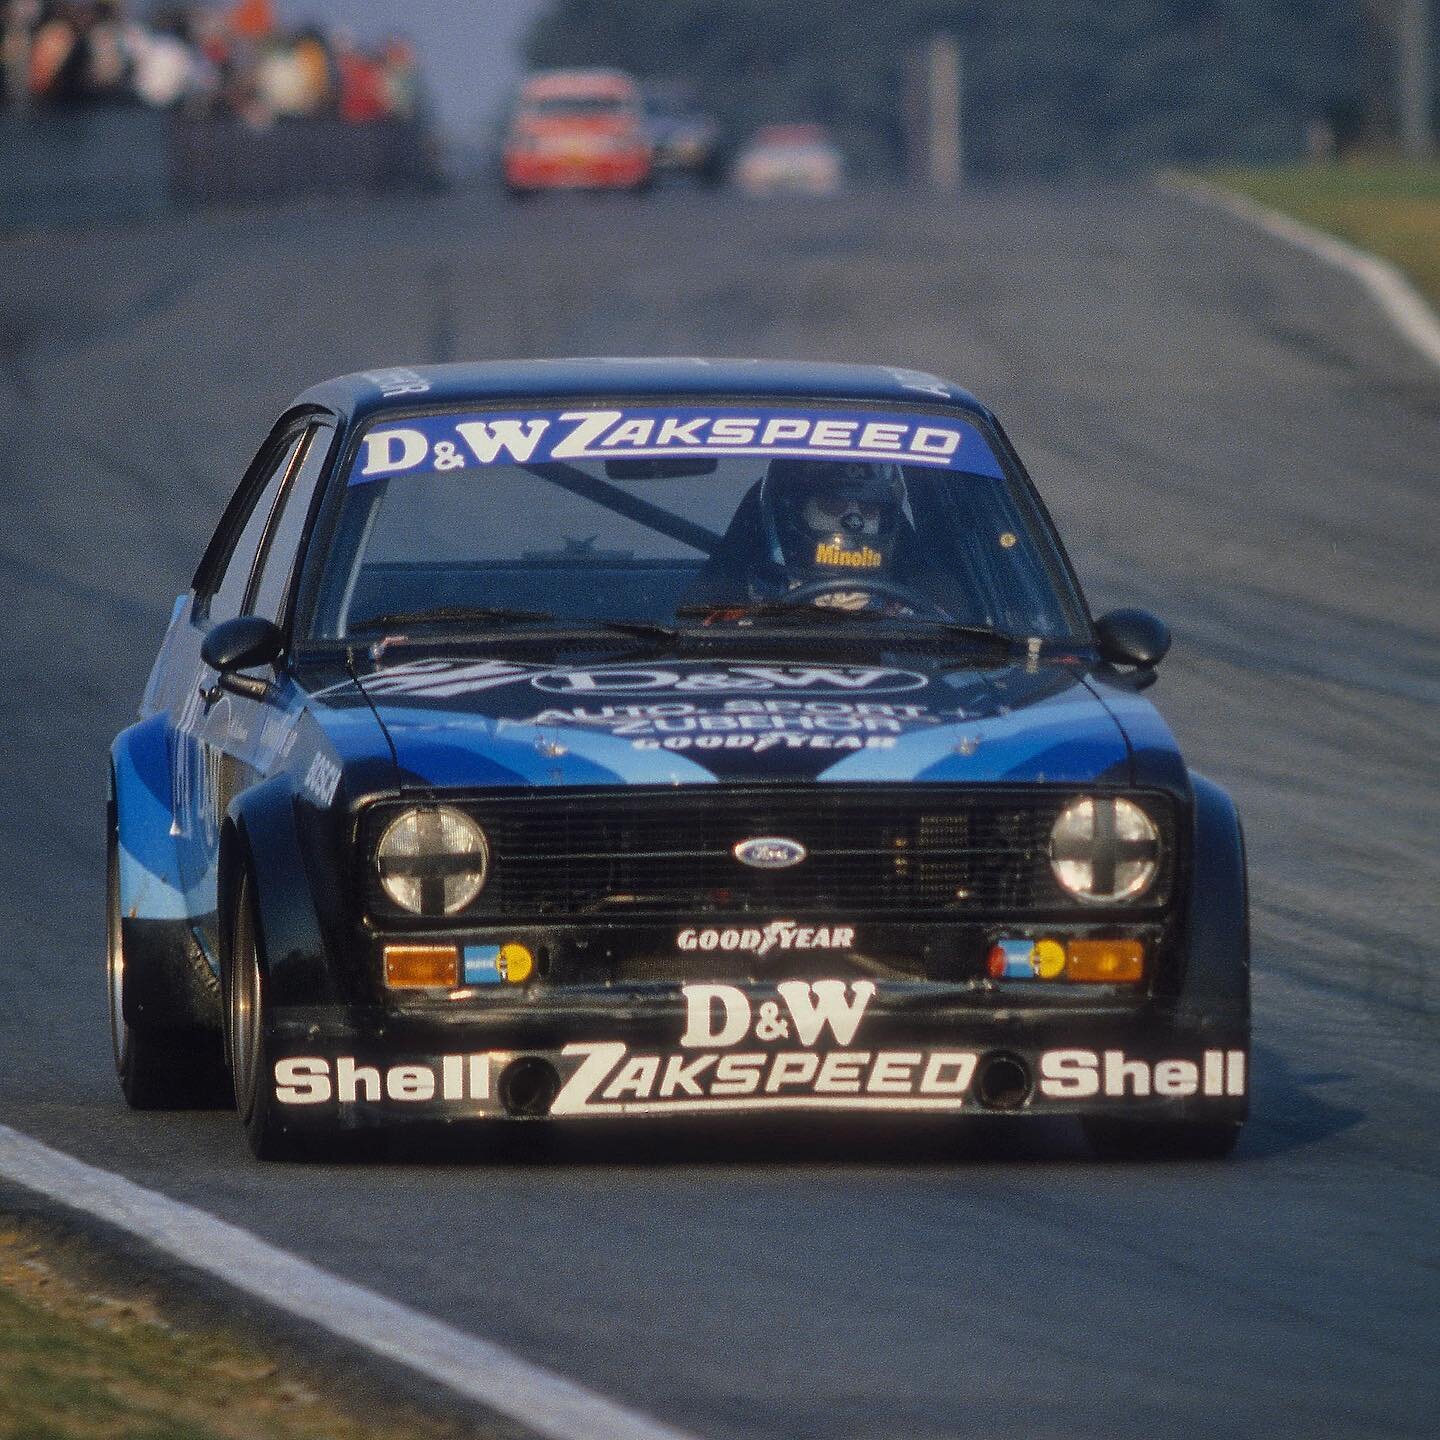 Hans Heyer and Water Nussbaumer shared the wheel of the D&amp;W Zakspeed Ford Escort RS1800 at the last round of the 1979 European Touring Car Championship in Zolder (EG Trophy). Qualified P4, they would not finish (clutch and gearbox failure).

📷 M